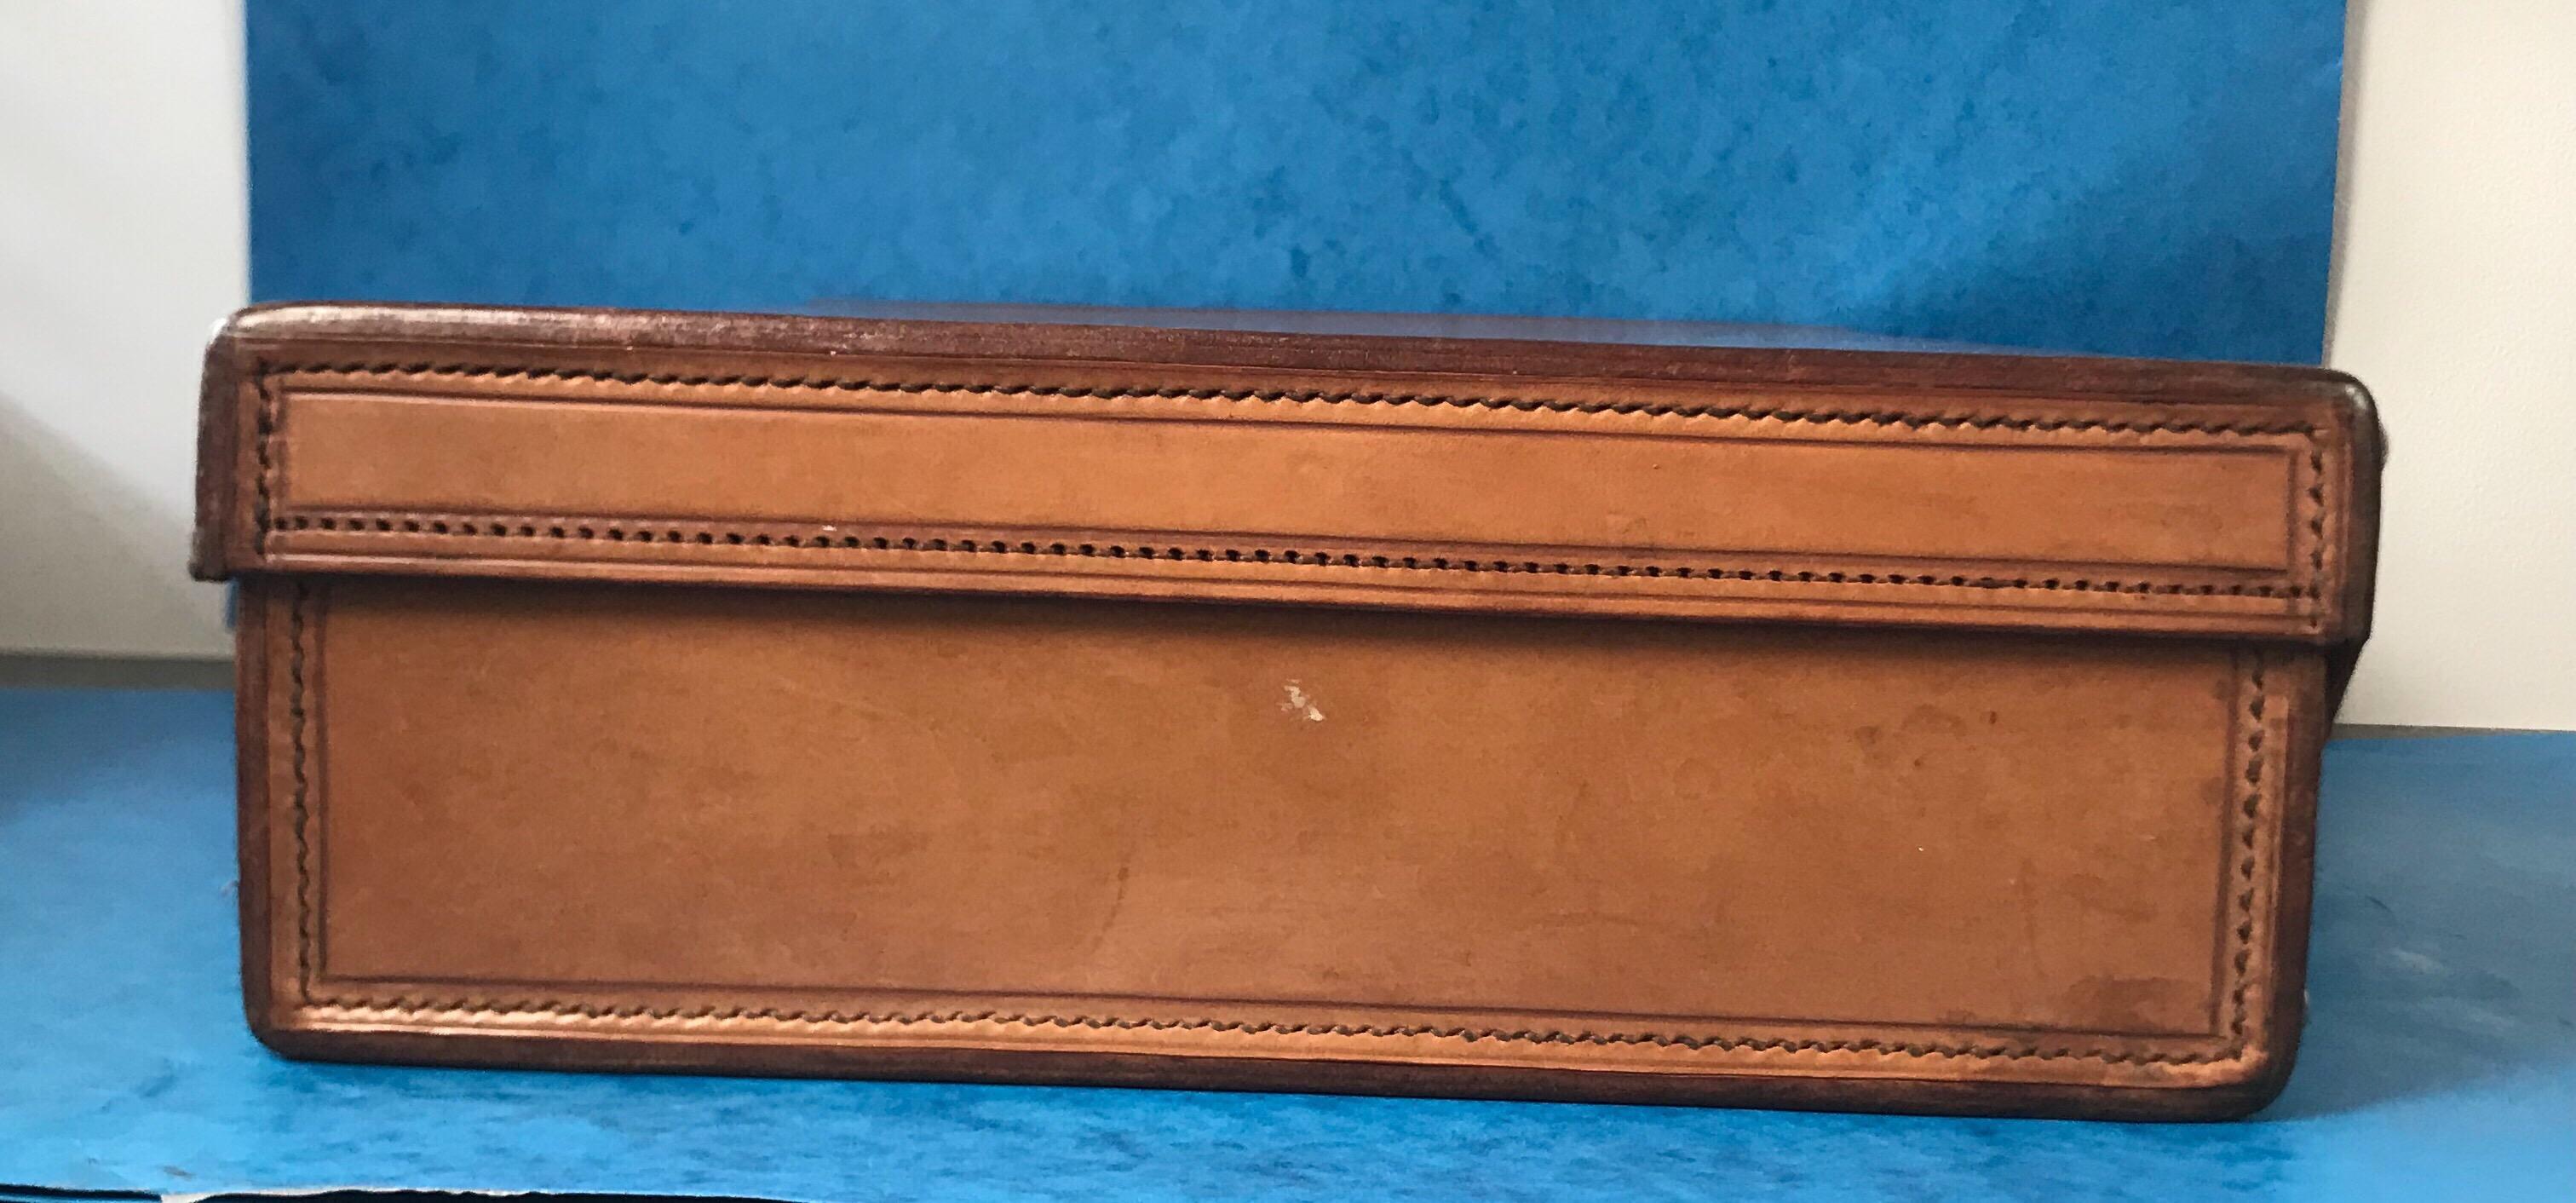 Other 1960-1970 Hide Leather Attaché Case by “W & H Gidden”